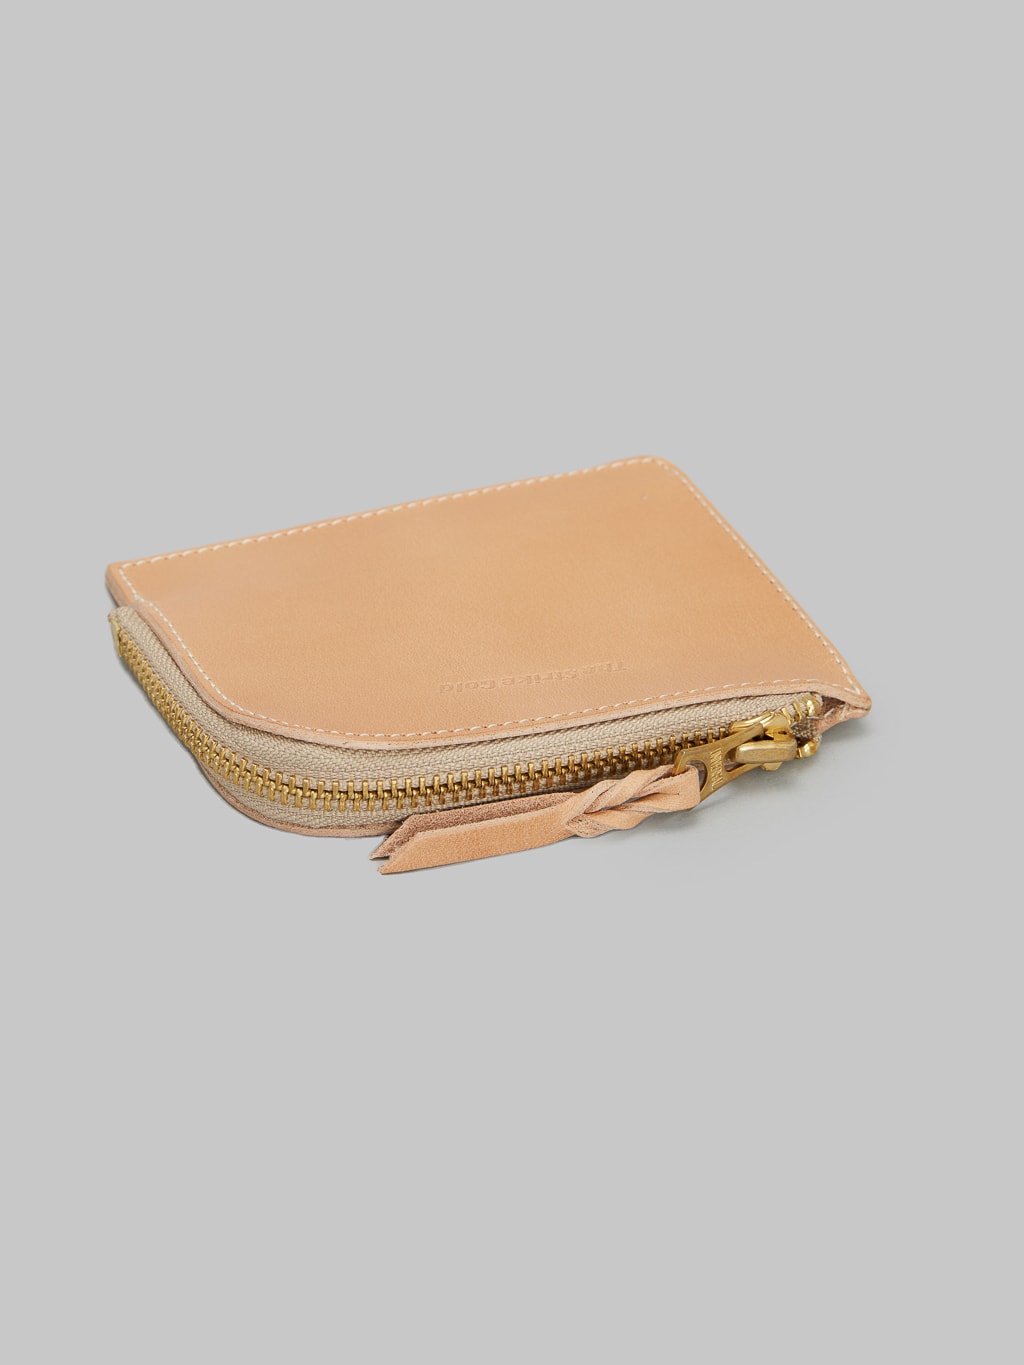 The Strike Gold Italian Leather Zip Wallet Natural